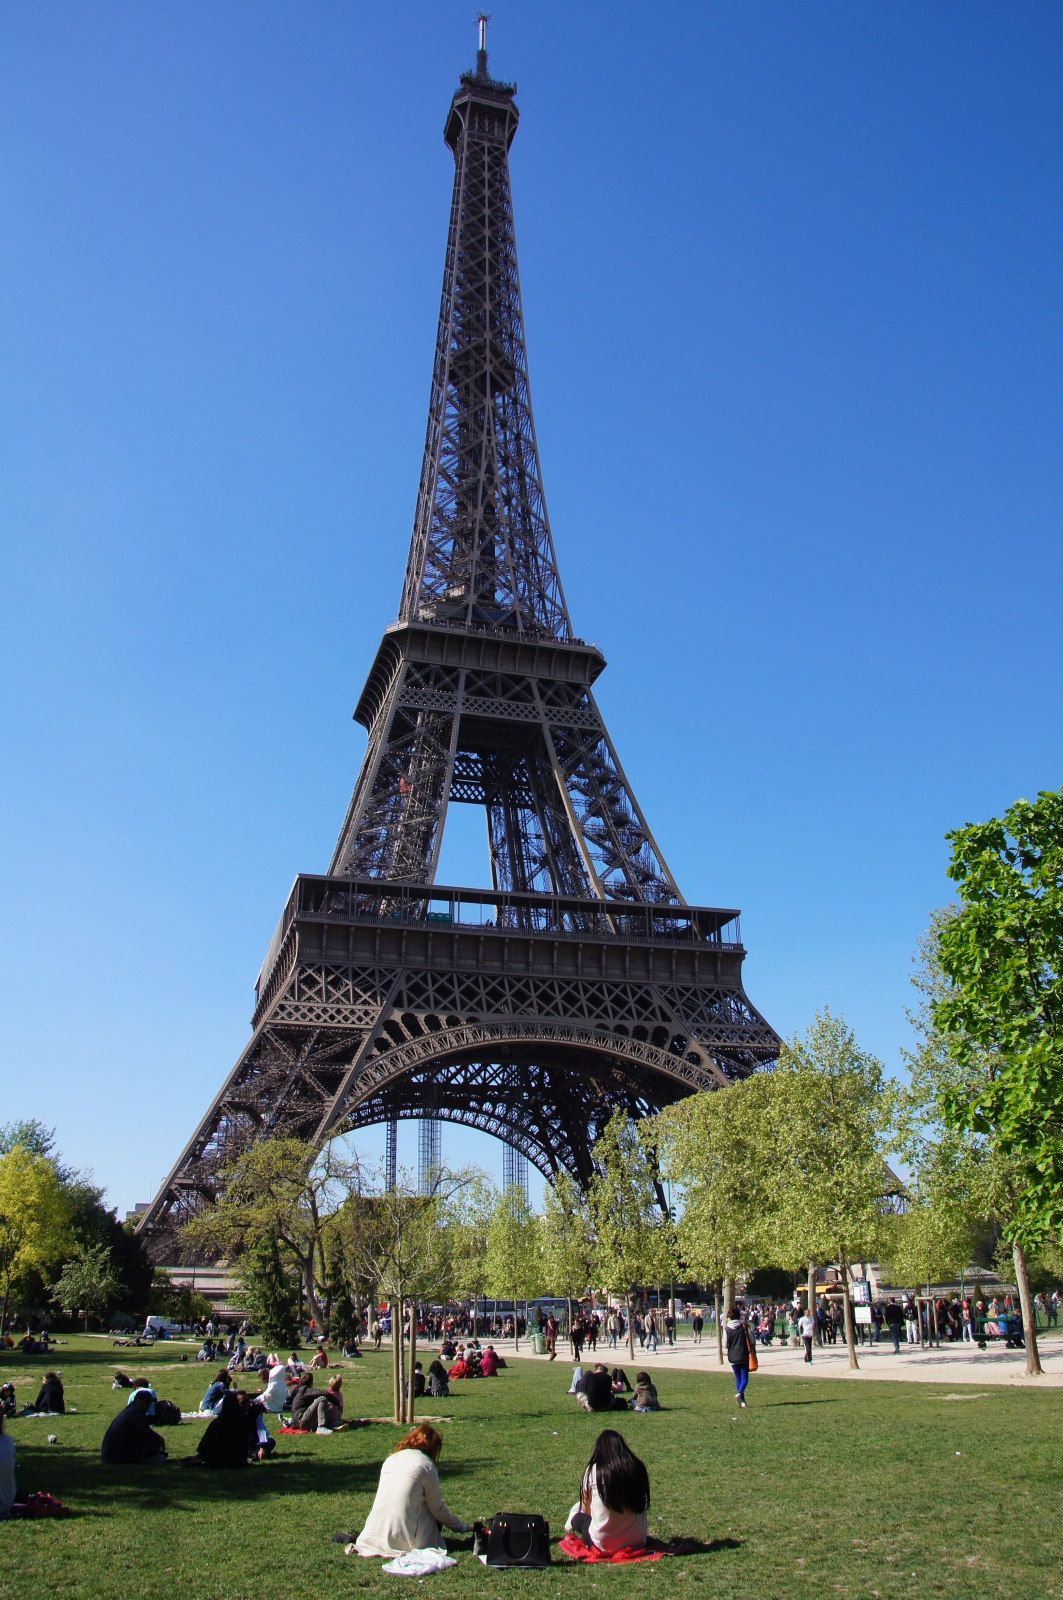 Another shot of the Eiffel Tower